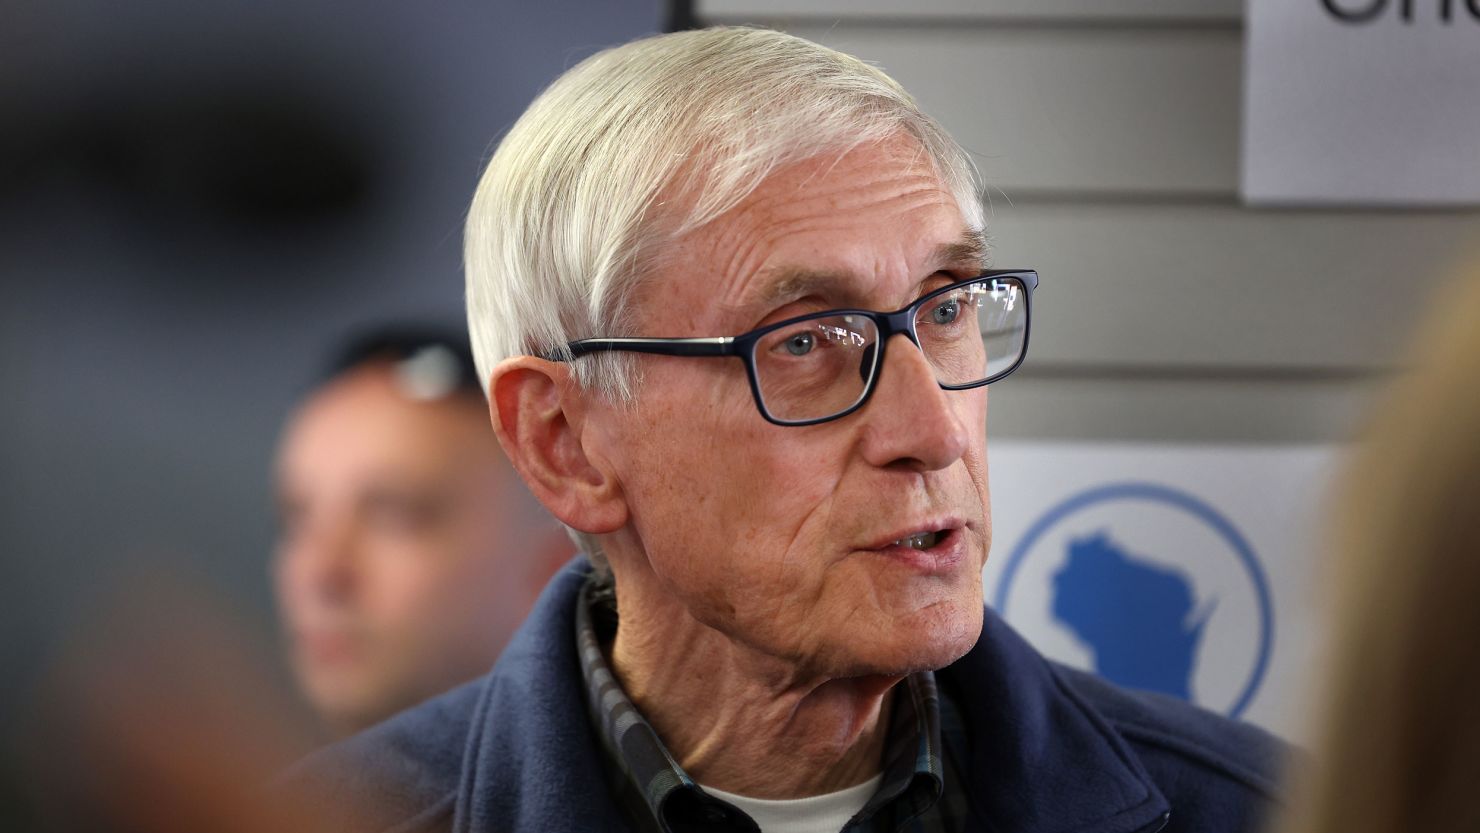 Wisconsin Gov. Tony Evers speaks to the press during a canvas launch event on November 7, 2022, in Milwaukee.